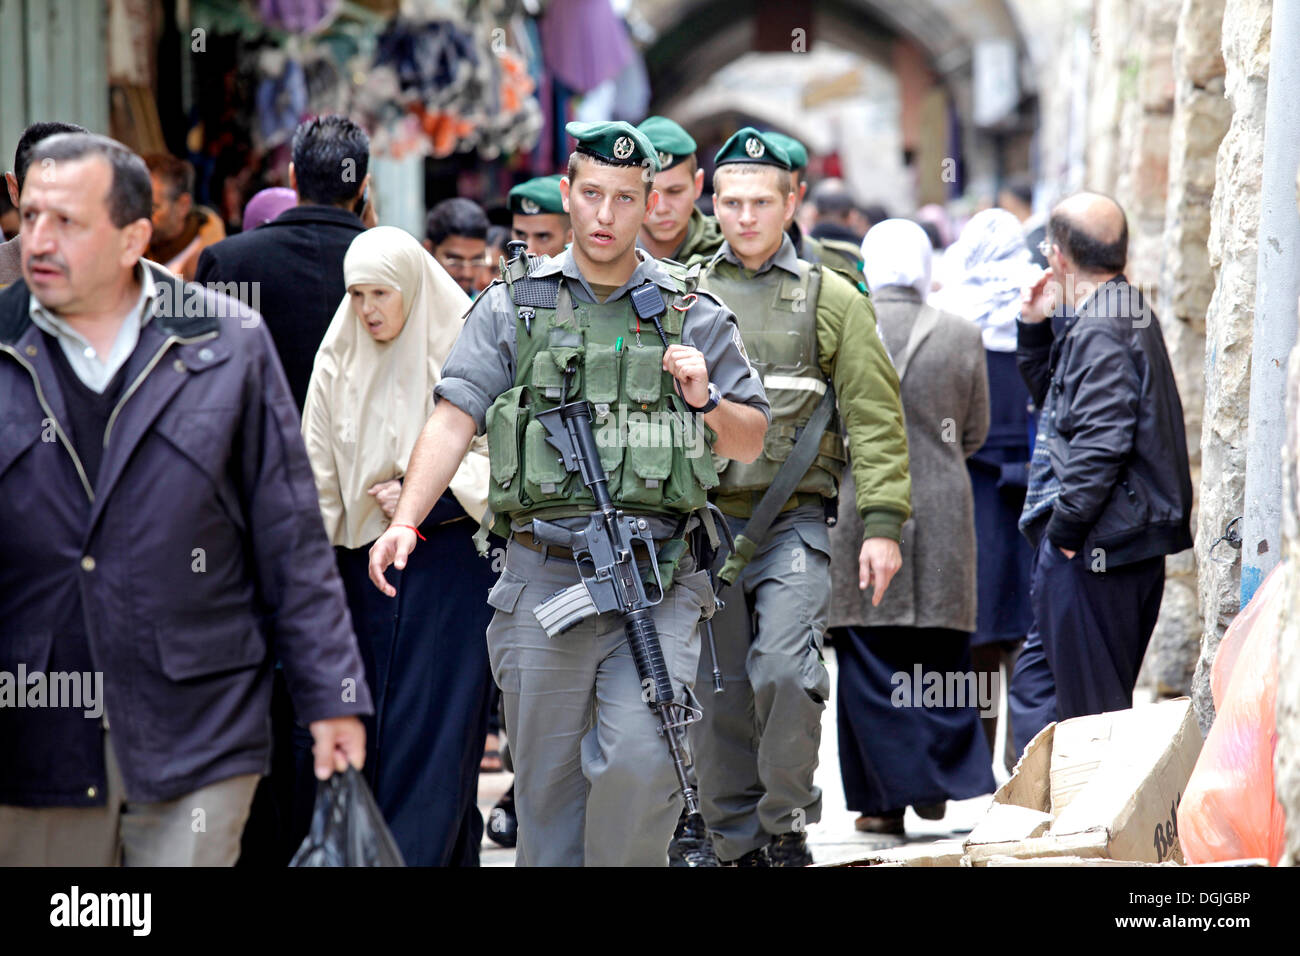 Soldiers at the Good Friday procession, Jerusalem, Yerushalayim, Israel, Middle East Stock Photo